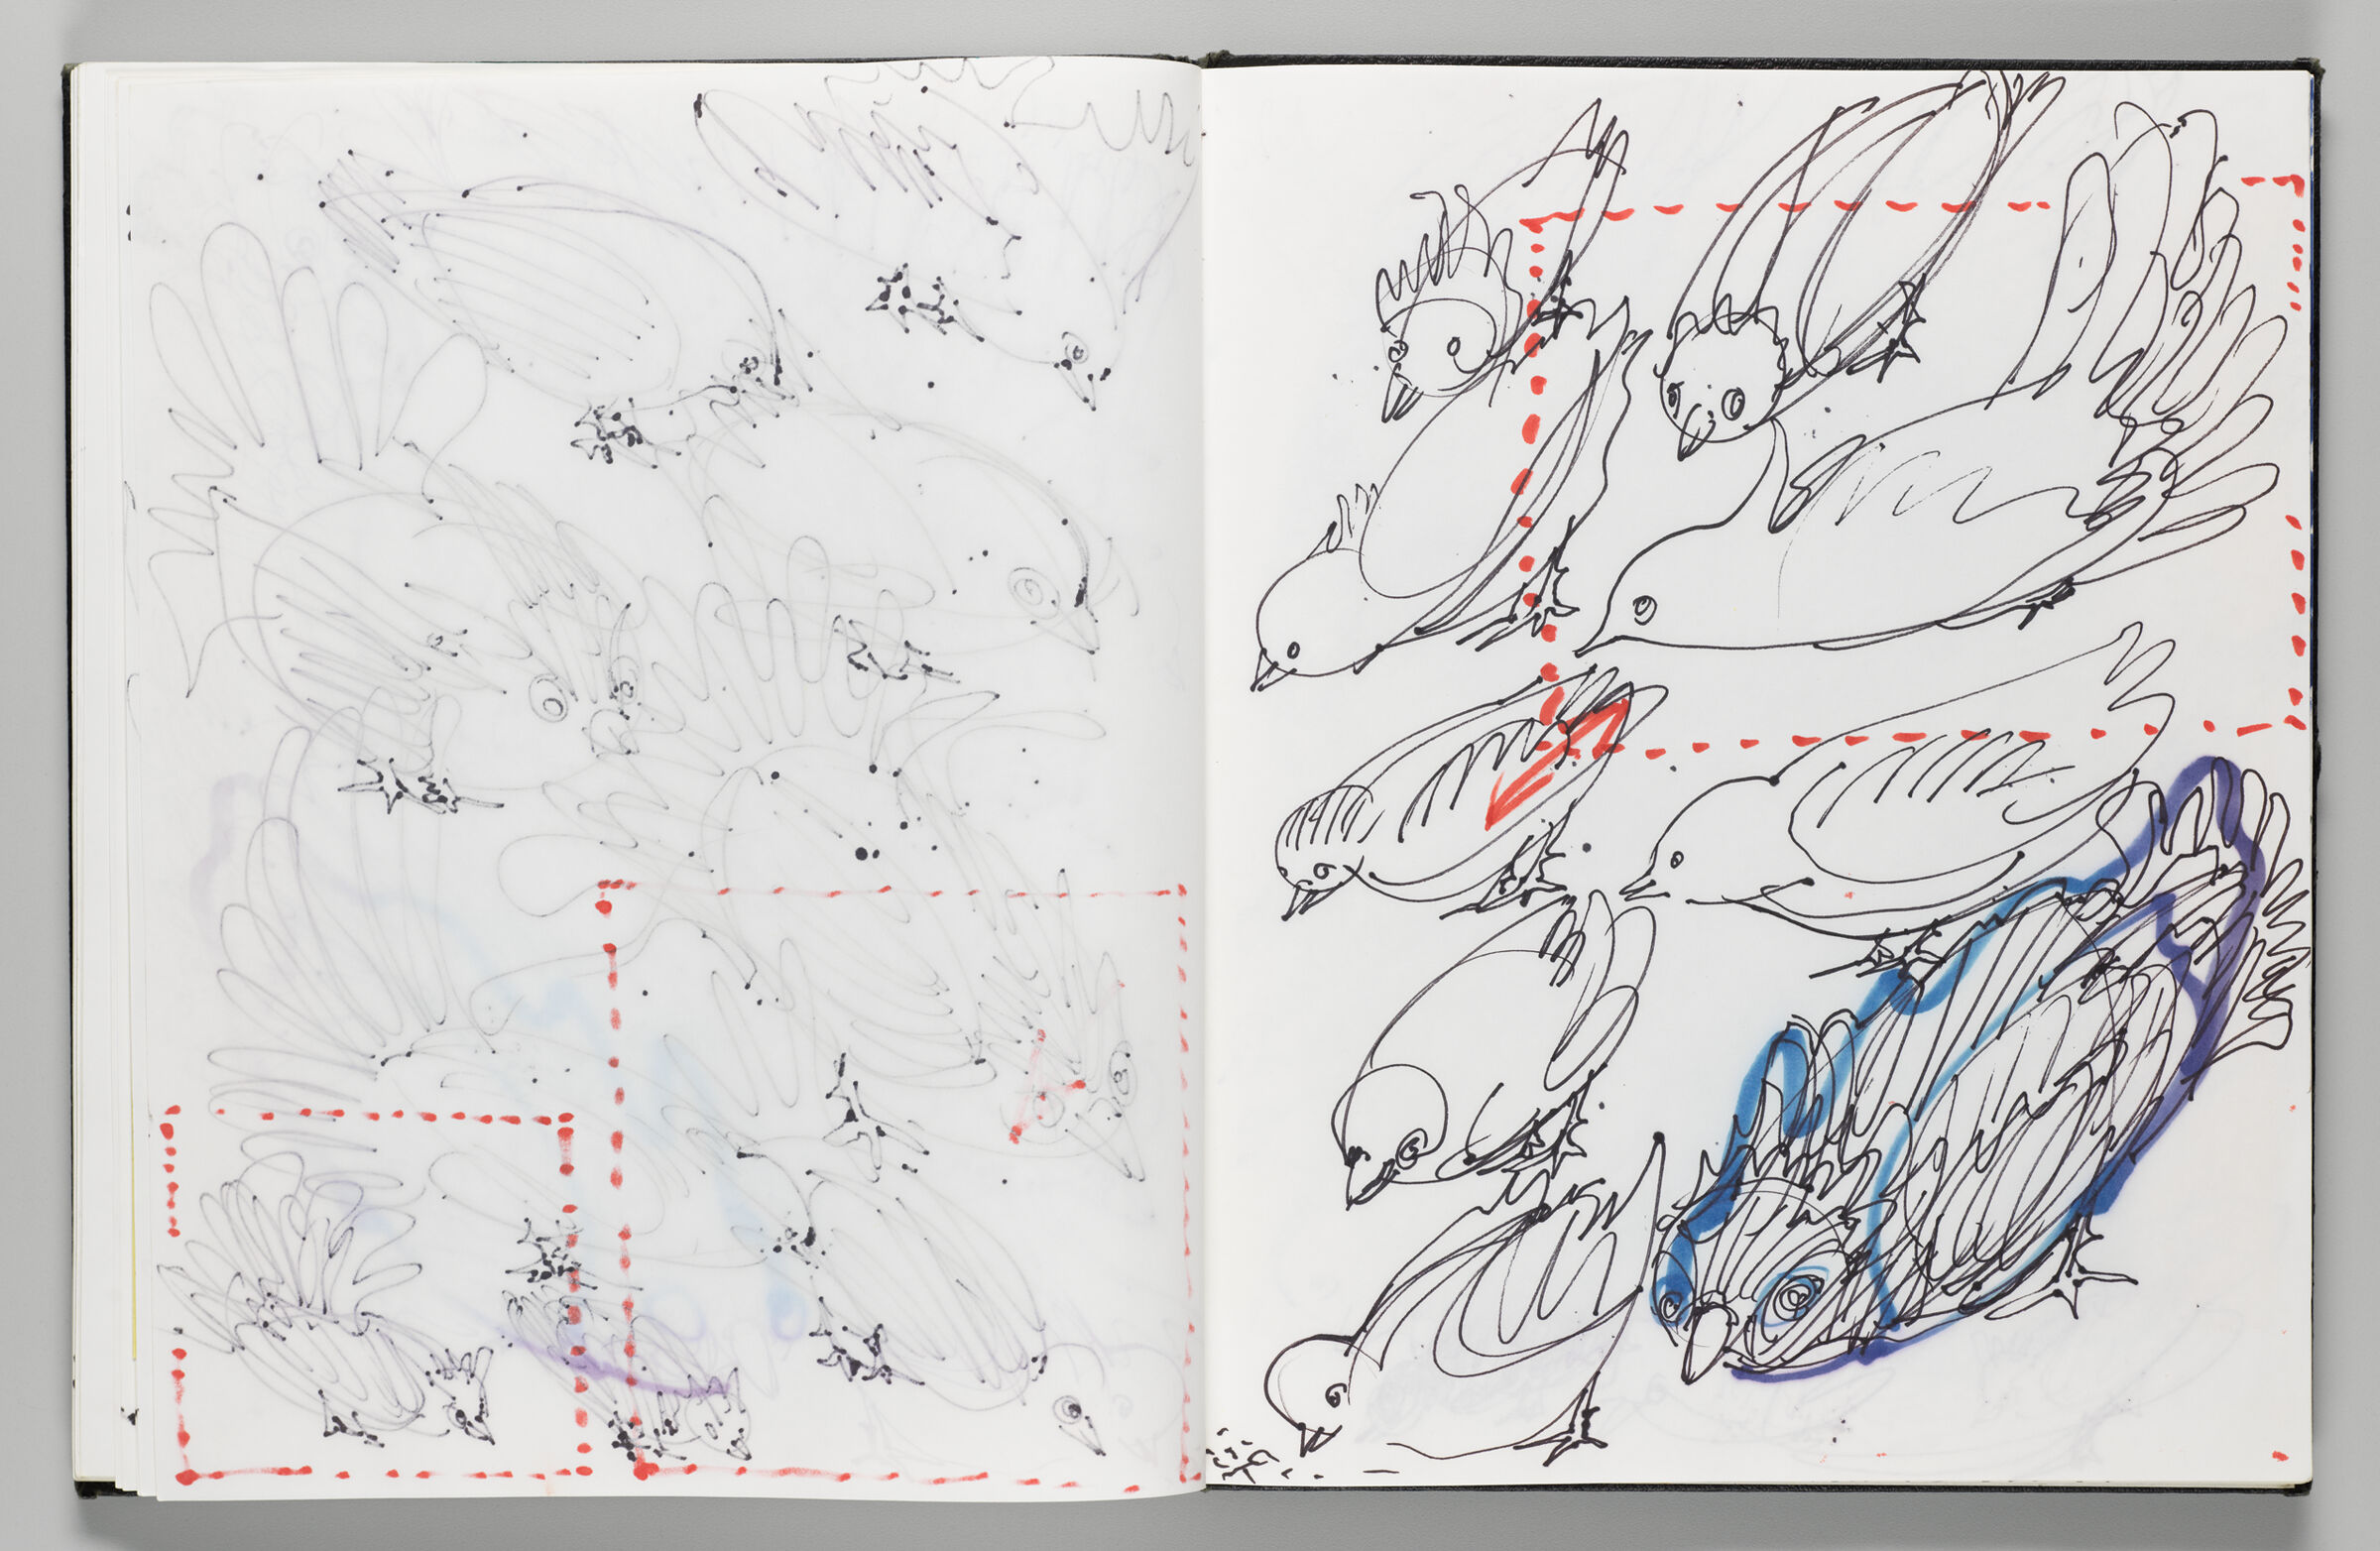 Untitled (Bleed-Through Of Previous Page, Left Page); Untitled (Bird Inflatables, Right Page)